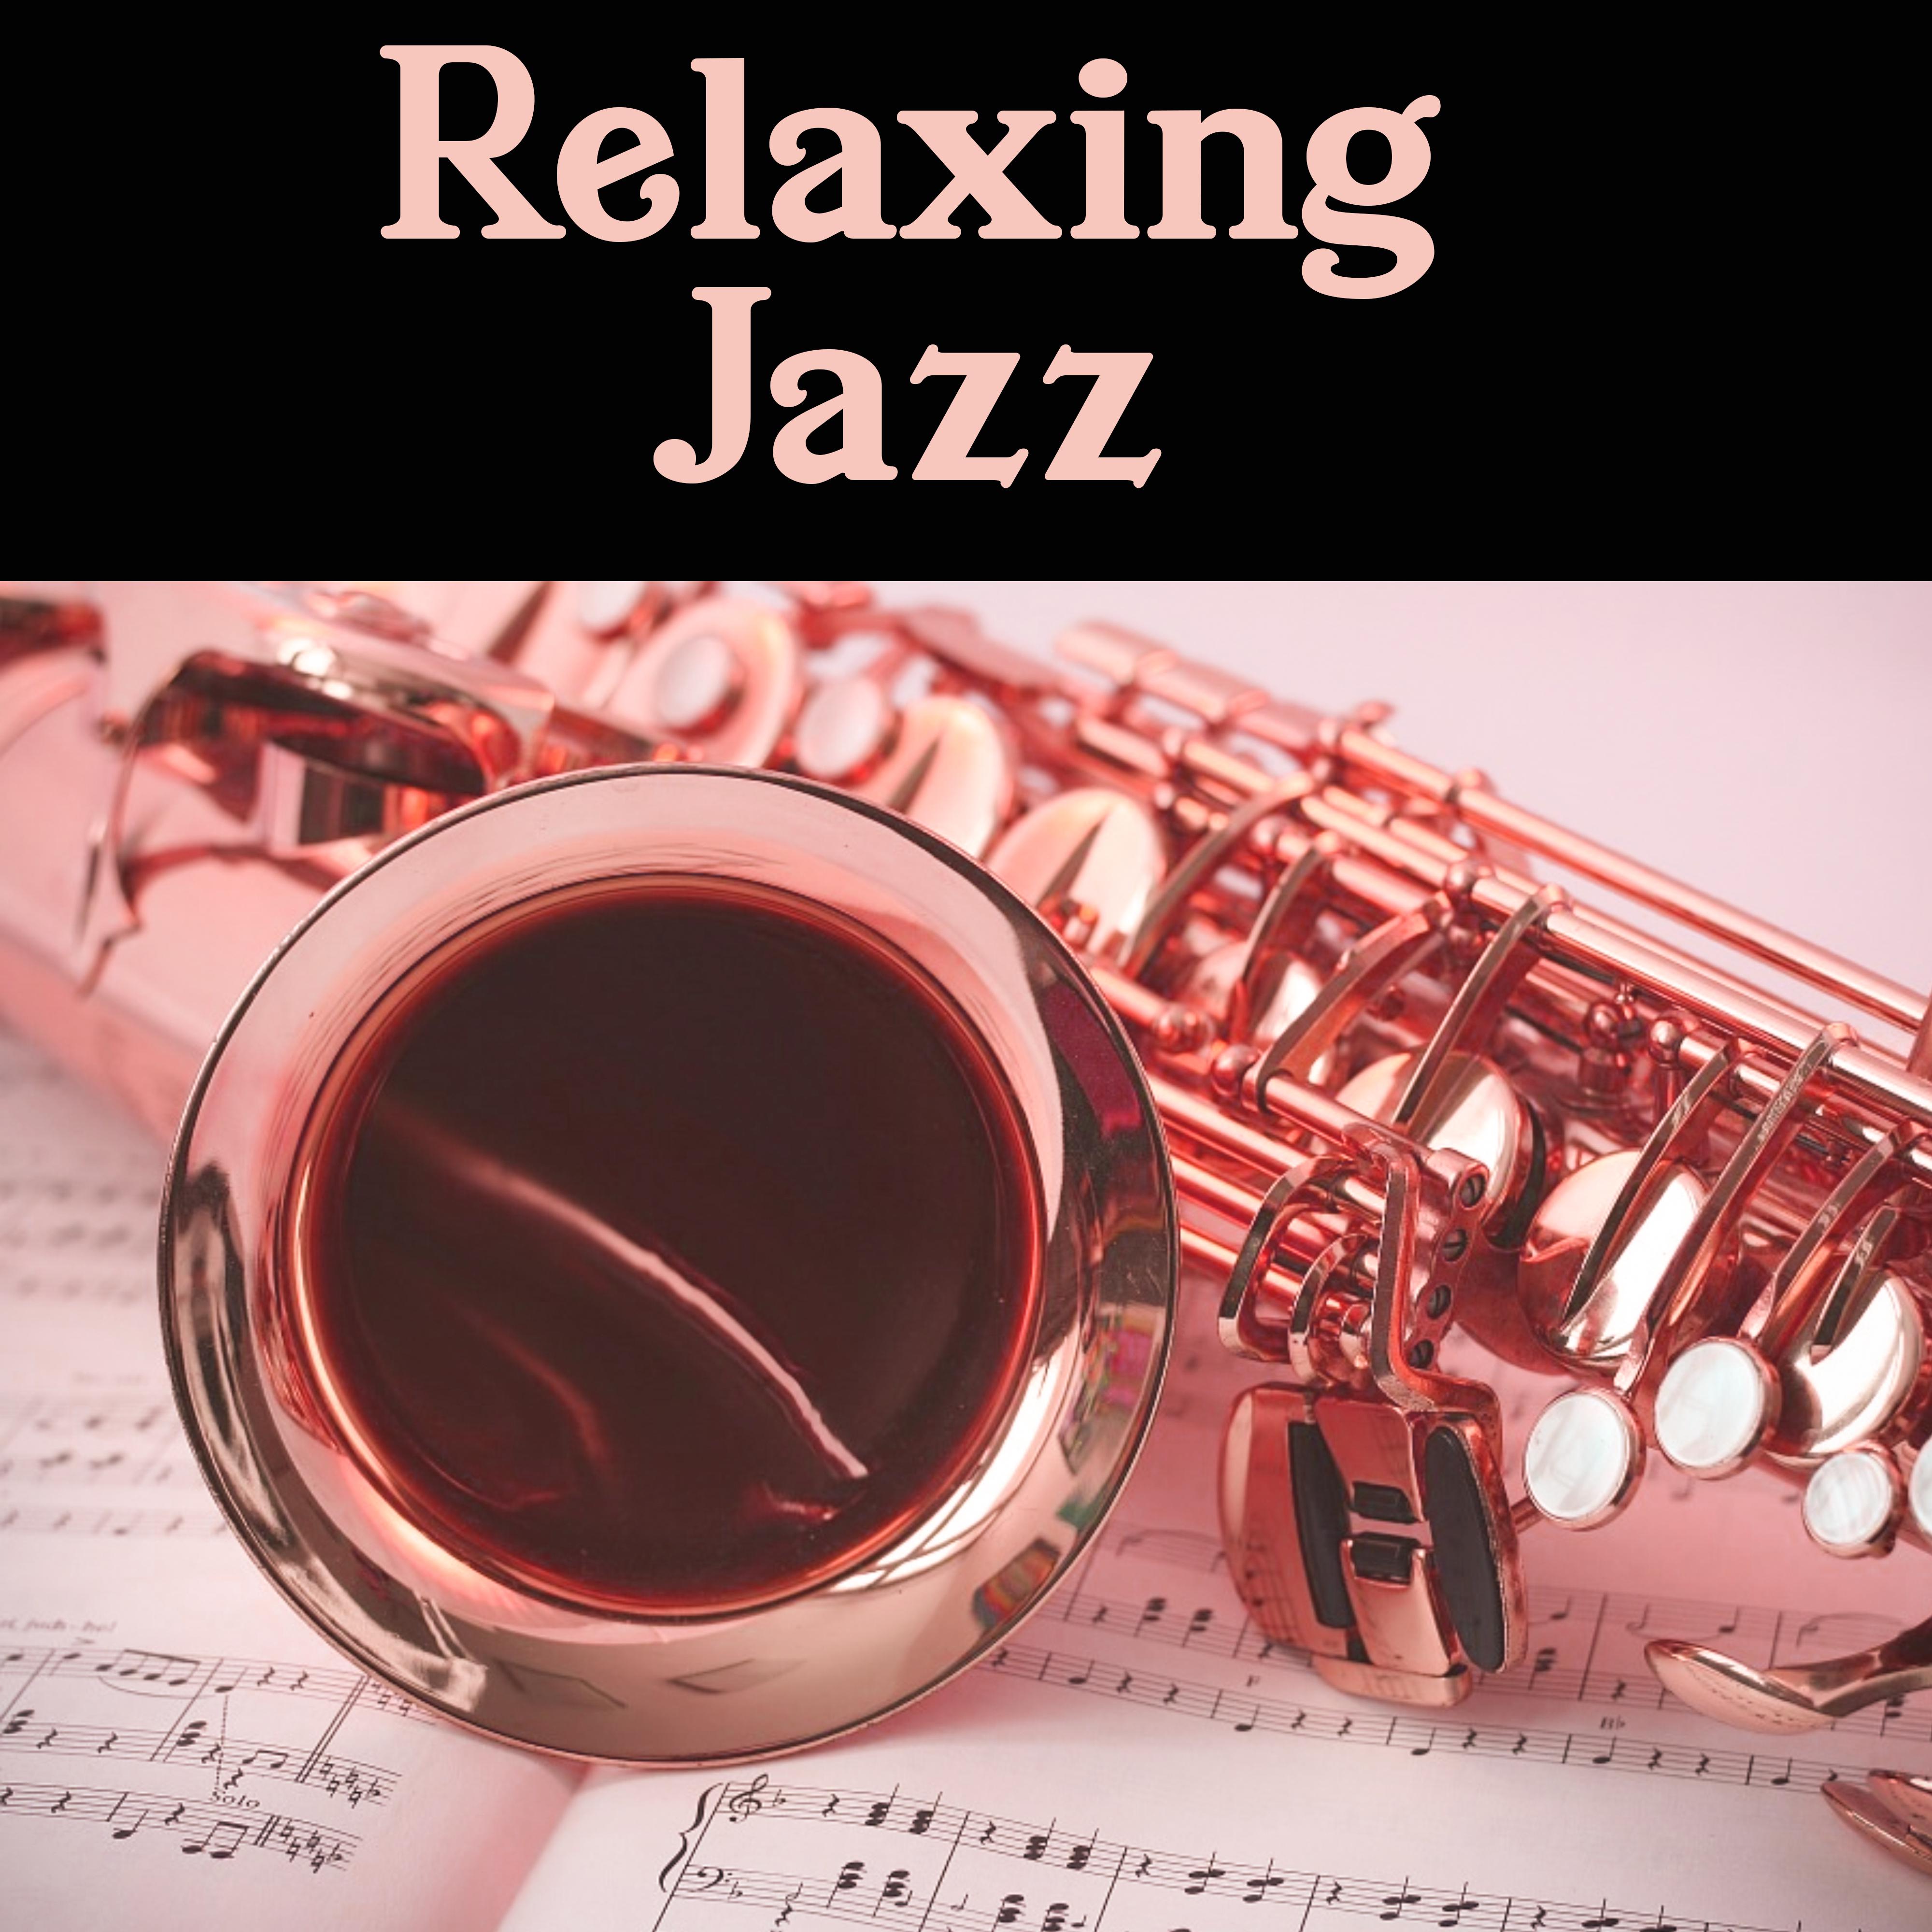 Relaxing Jazz  - Jazz Music for Relax Time With Wine,  Instrumental Lounge, Background for Jazz Bar & Jazz Club